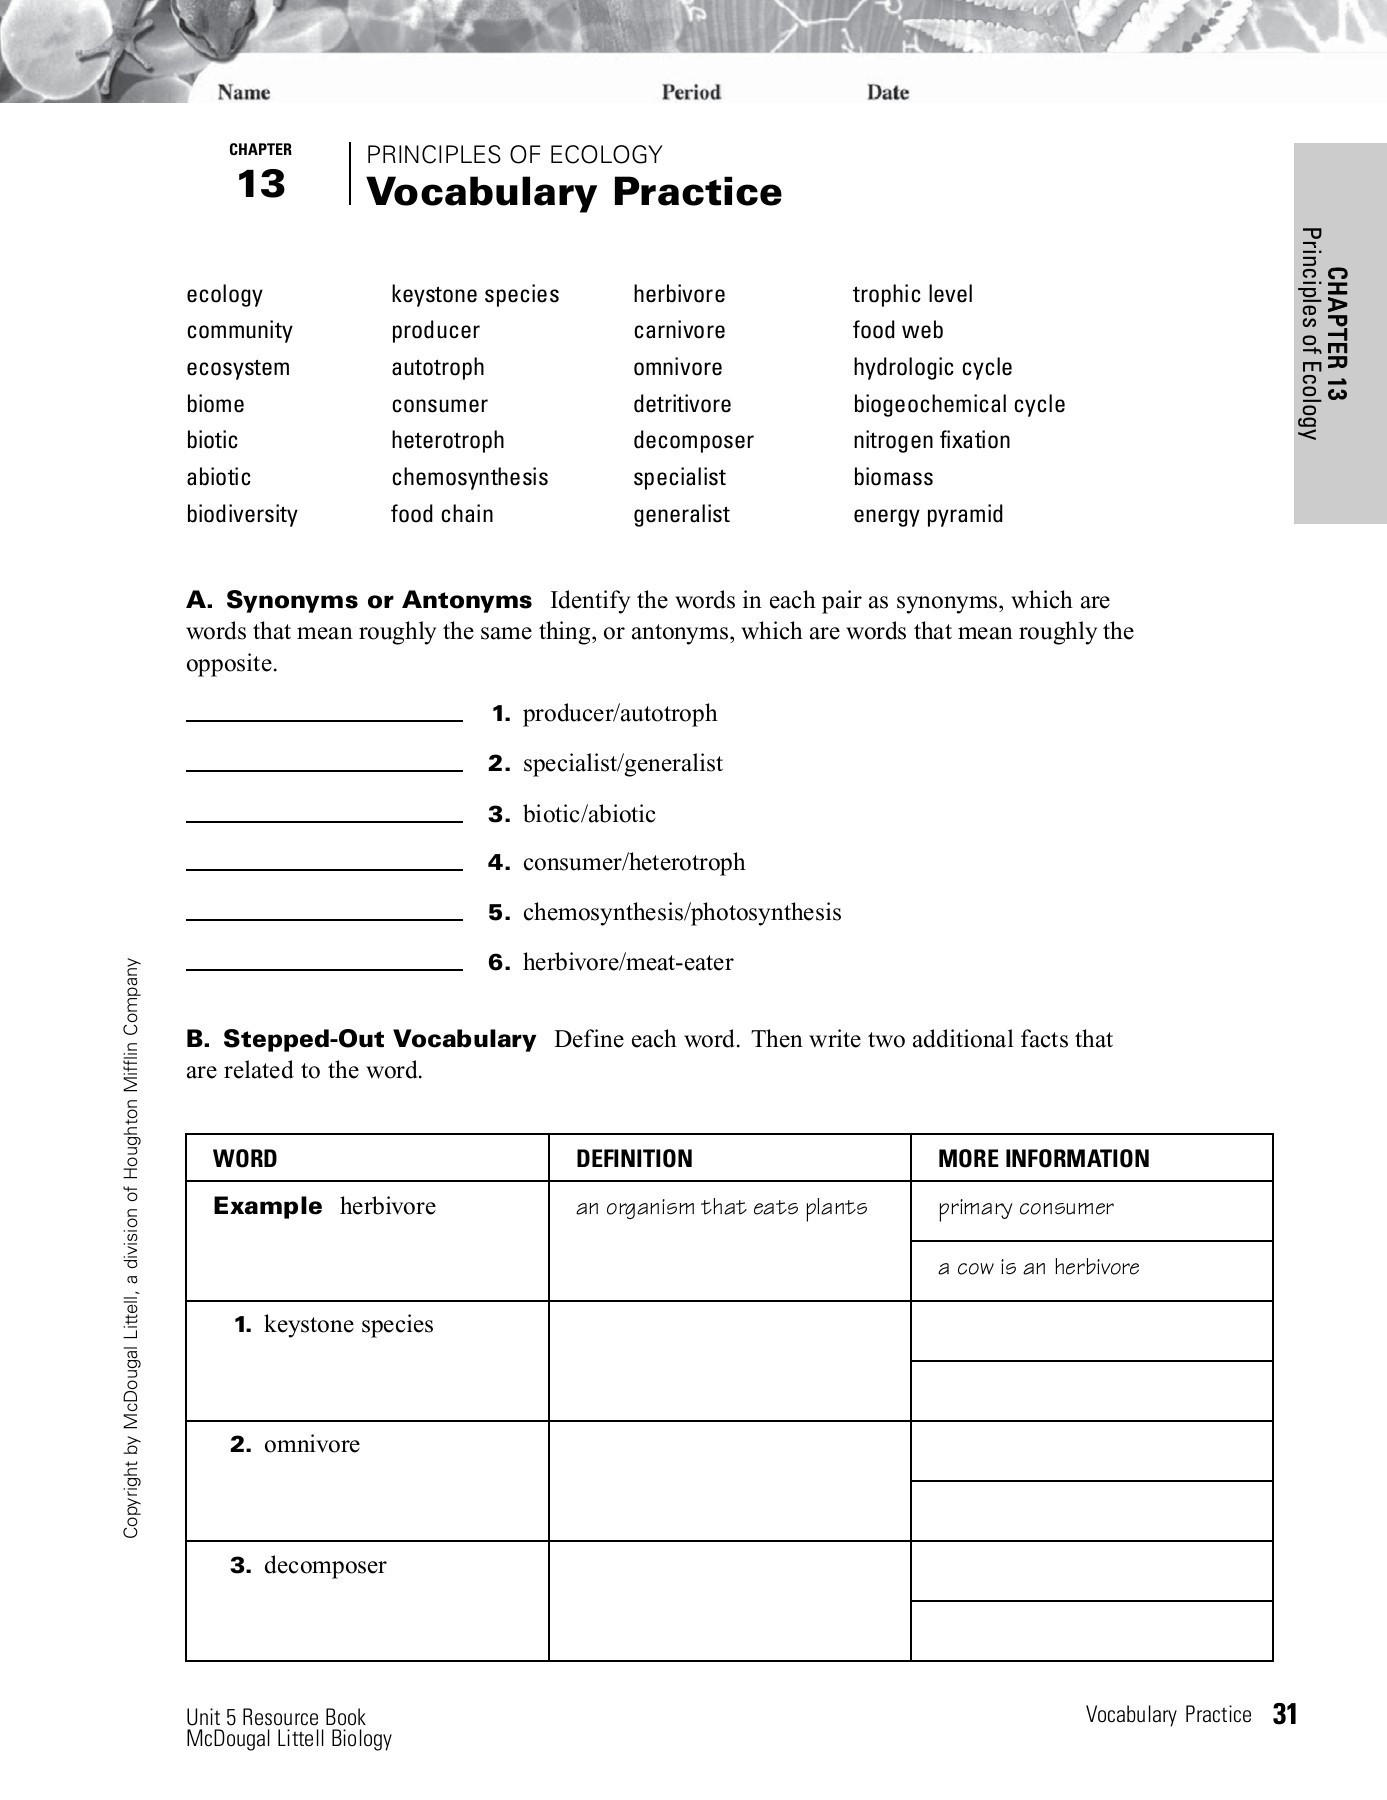 Principles Of Ecology Worksheet Answers Chapter Principles Of Ecology 13 Vocabulary Practice Pages 1